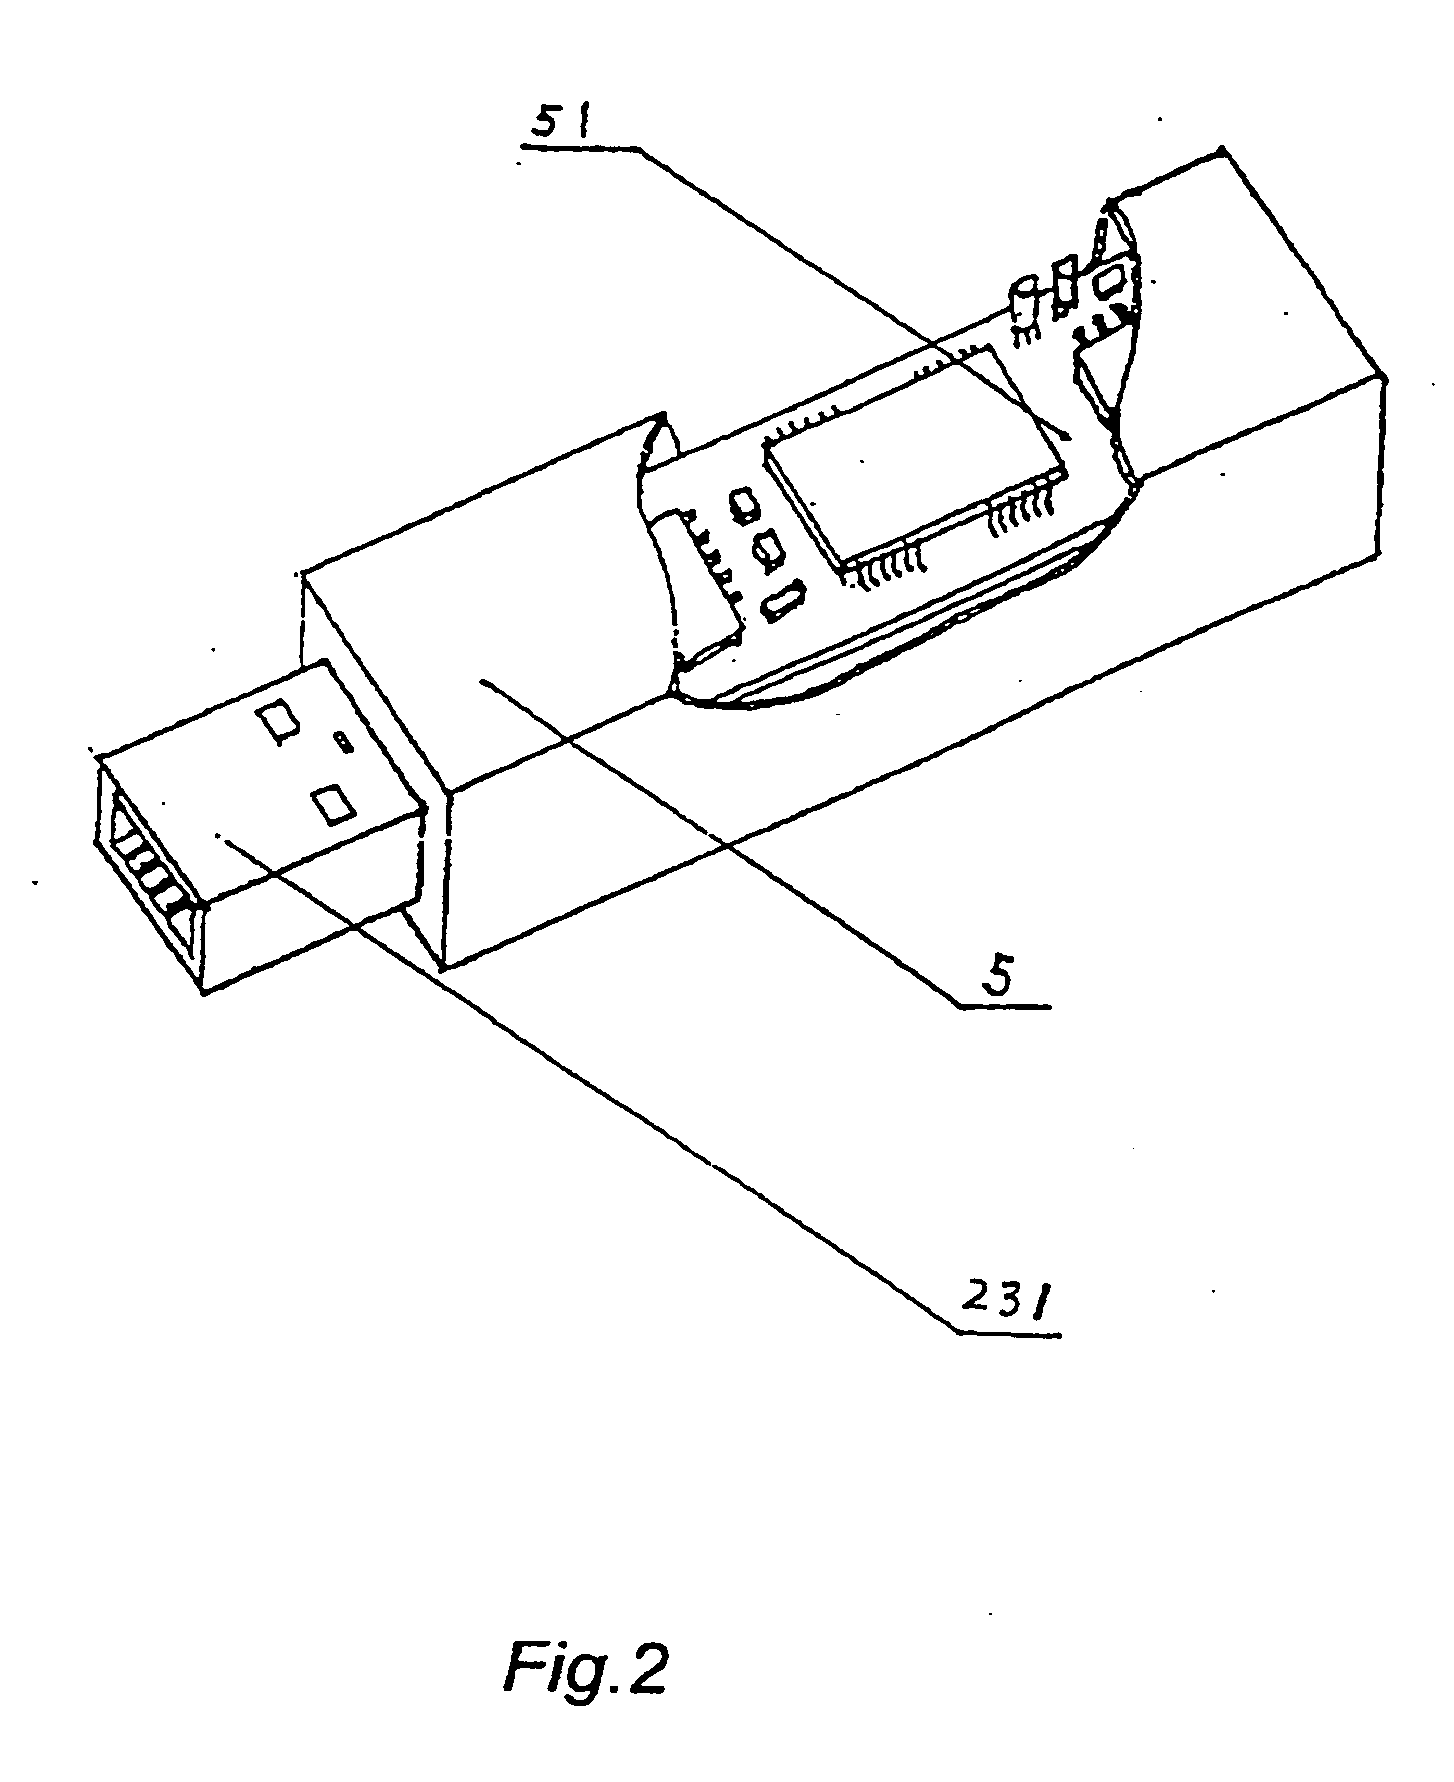 Electronic flash memory external storage method and device